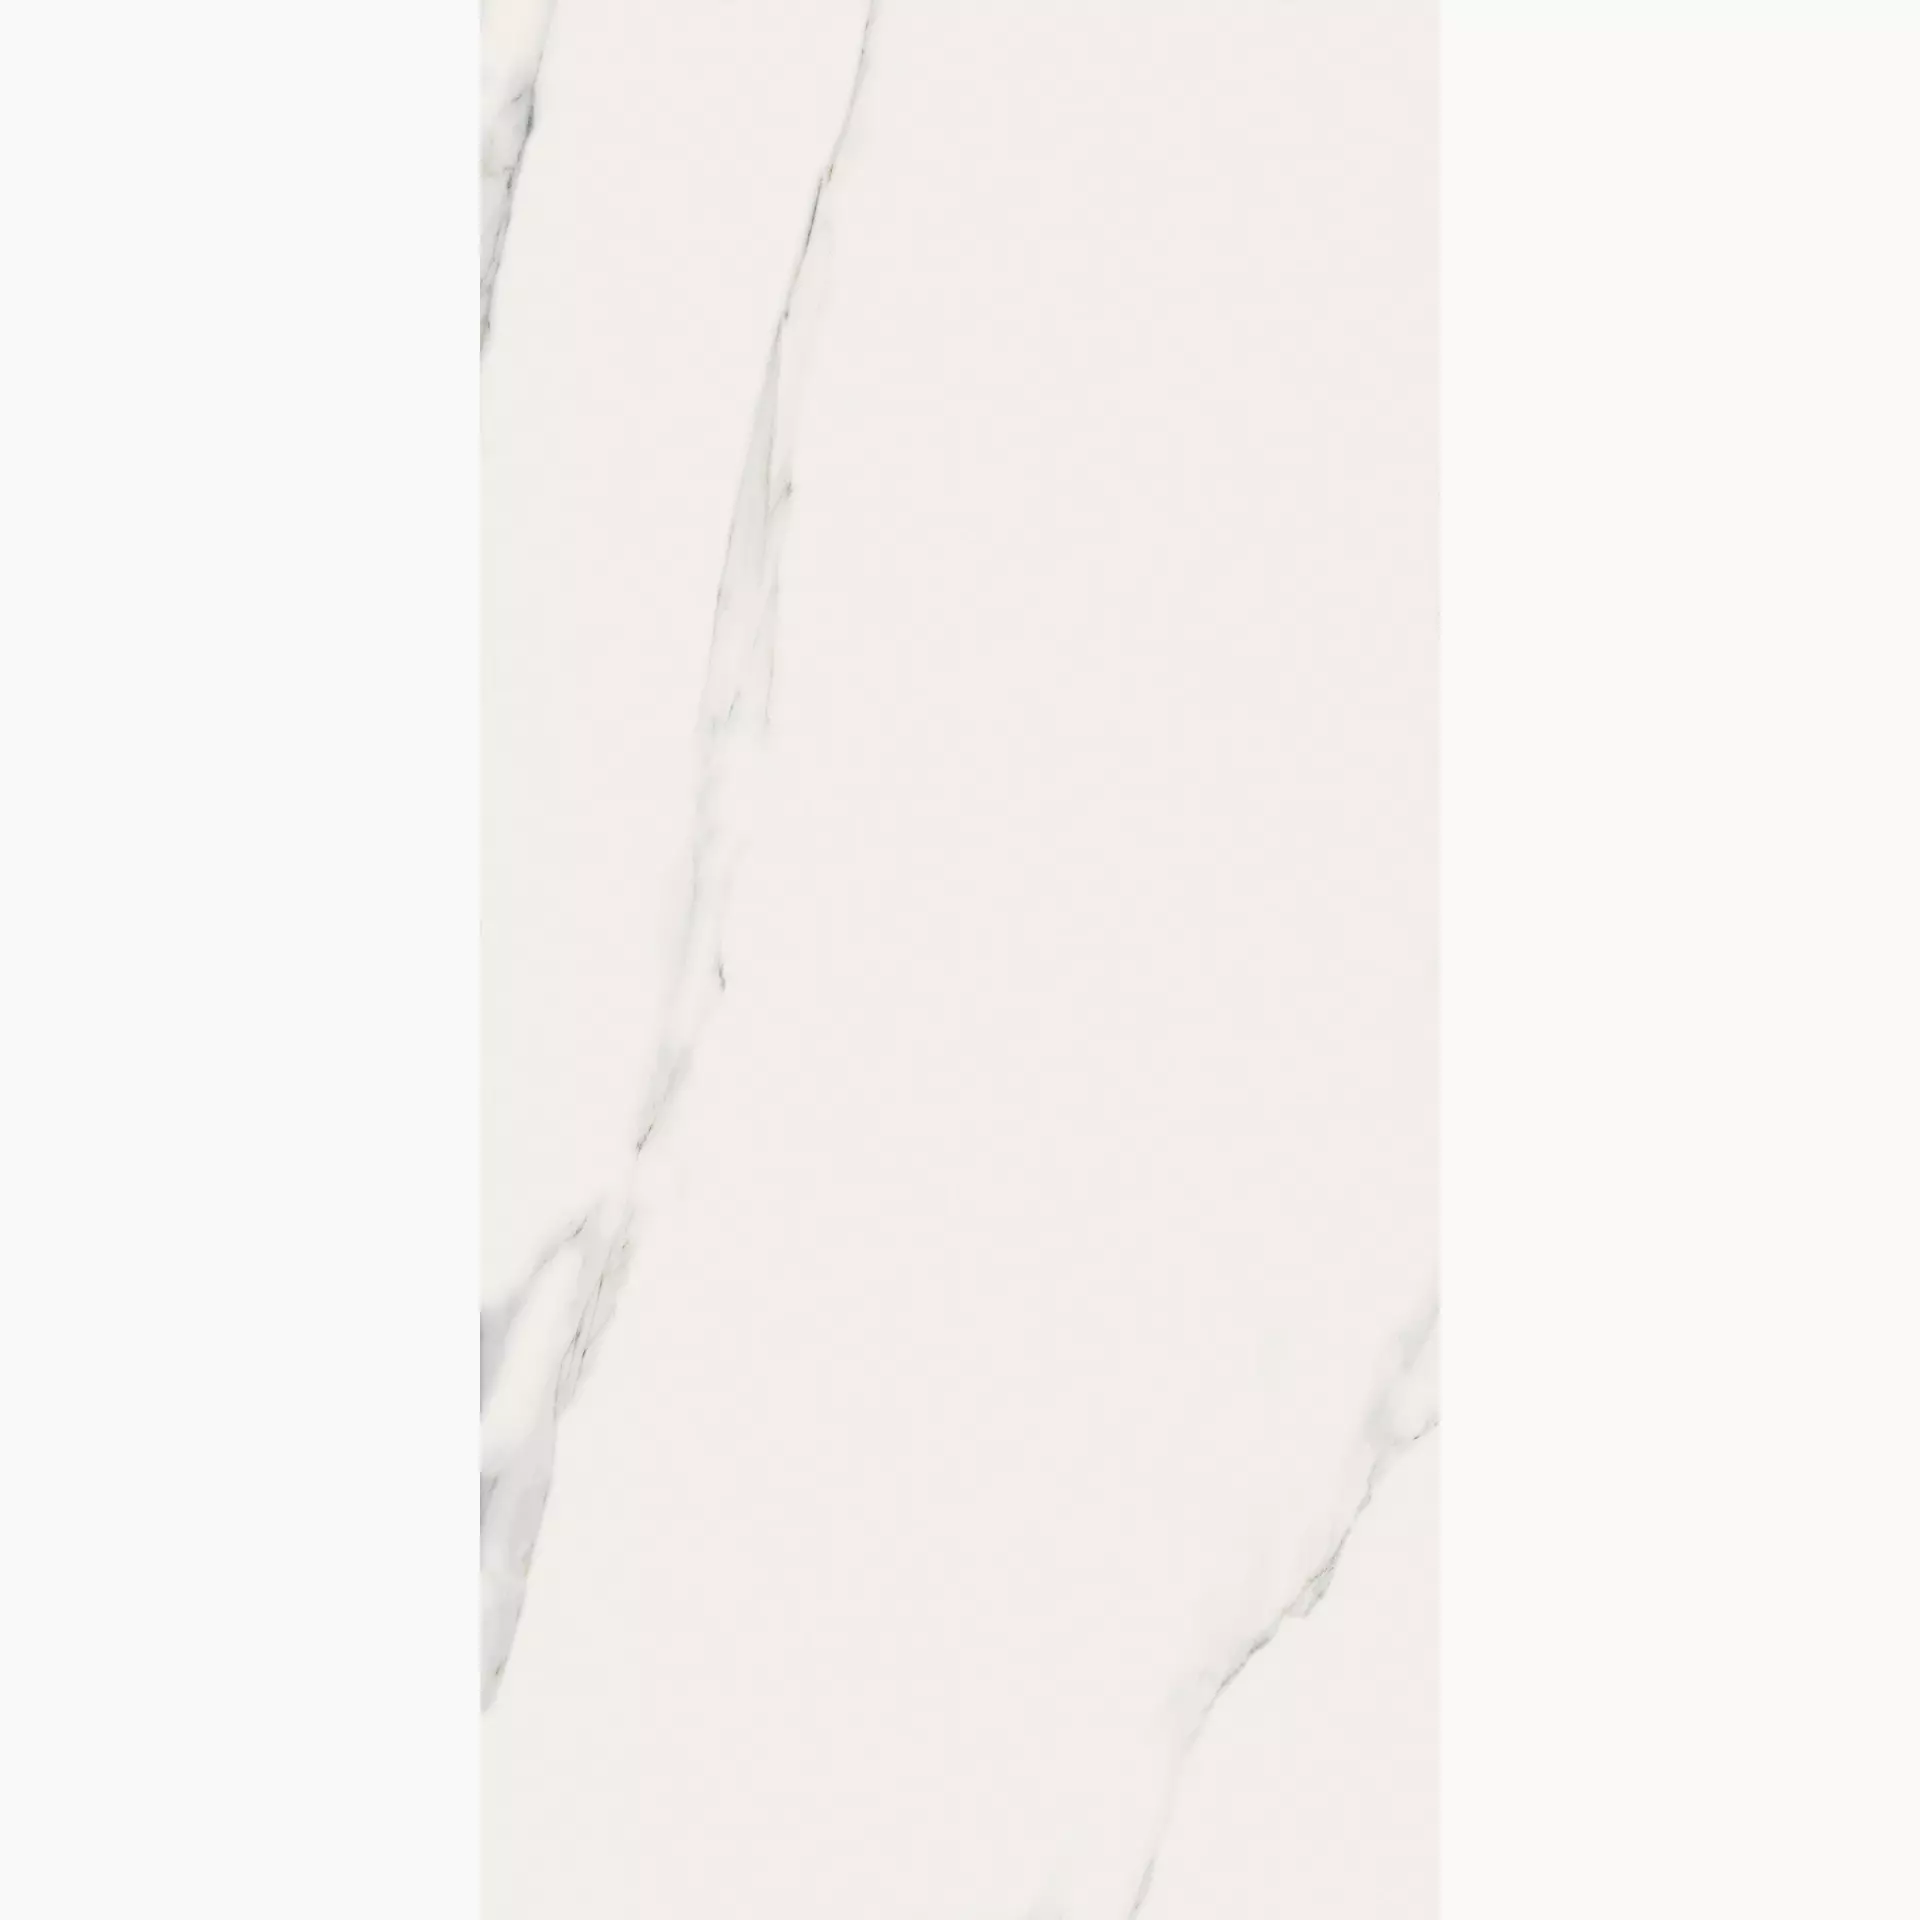 Mirage Jewels Jw 01 Bianco Statuario Lucido Stair plate A ANP8 30x60cm 9mm